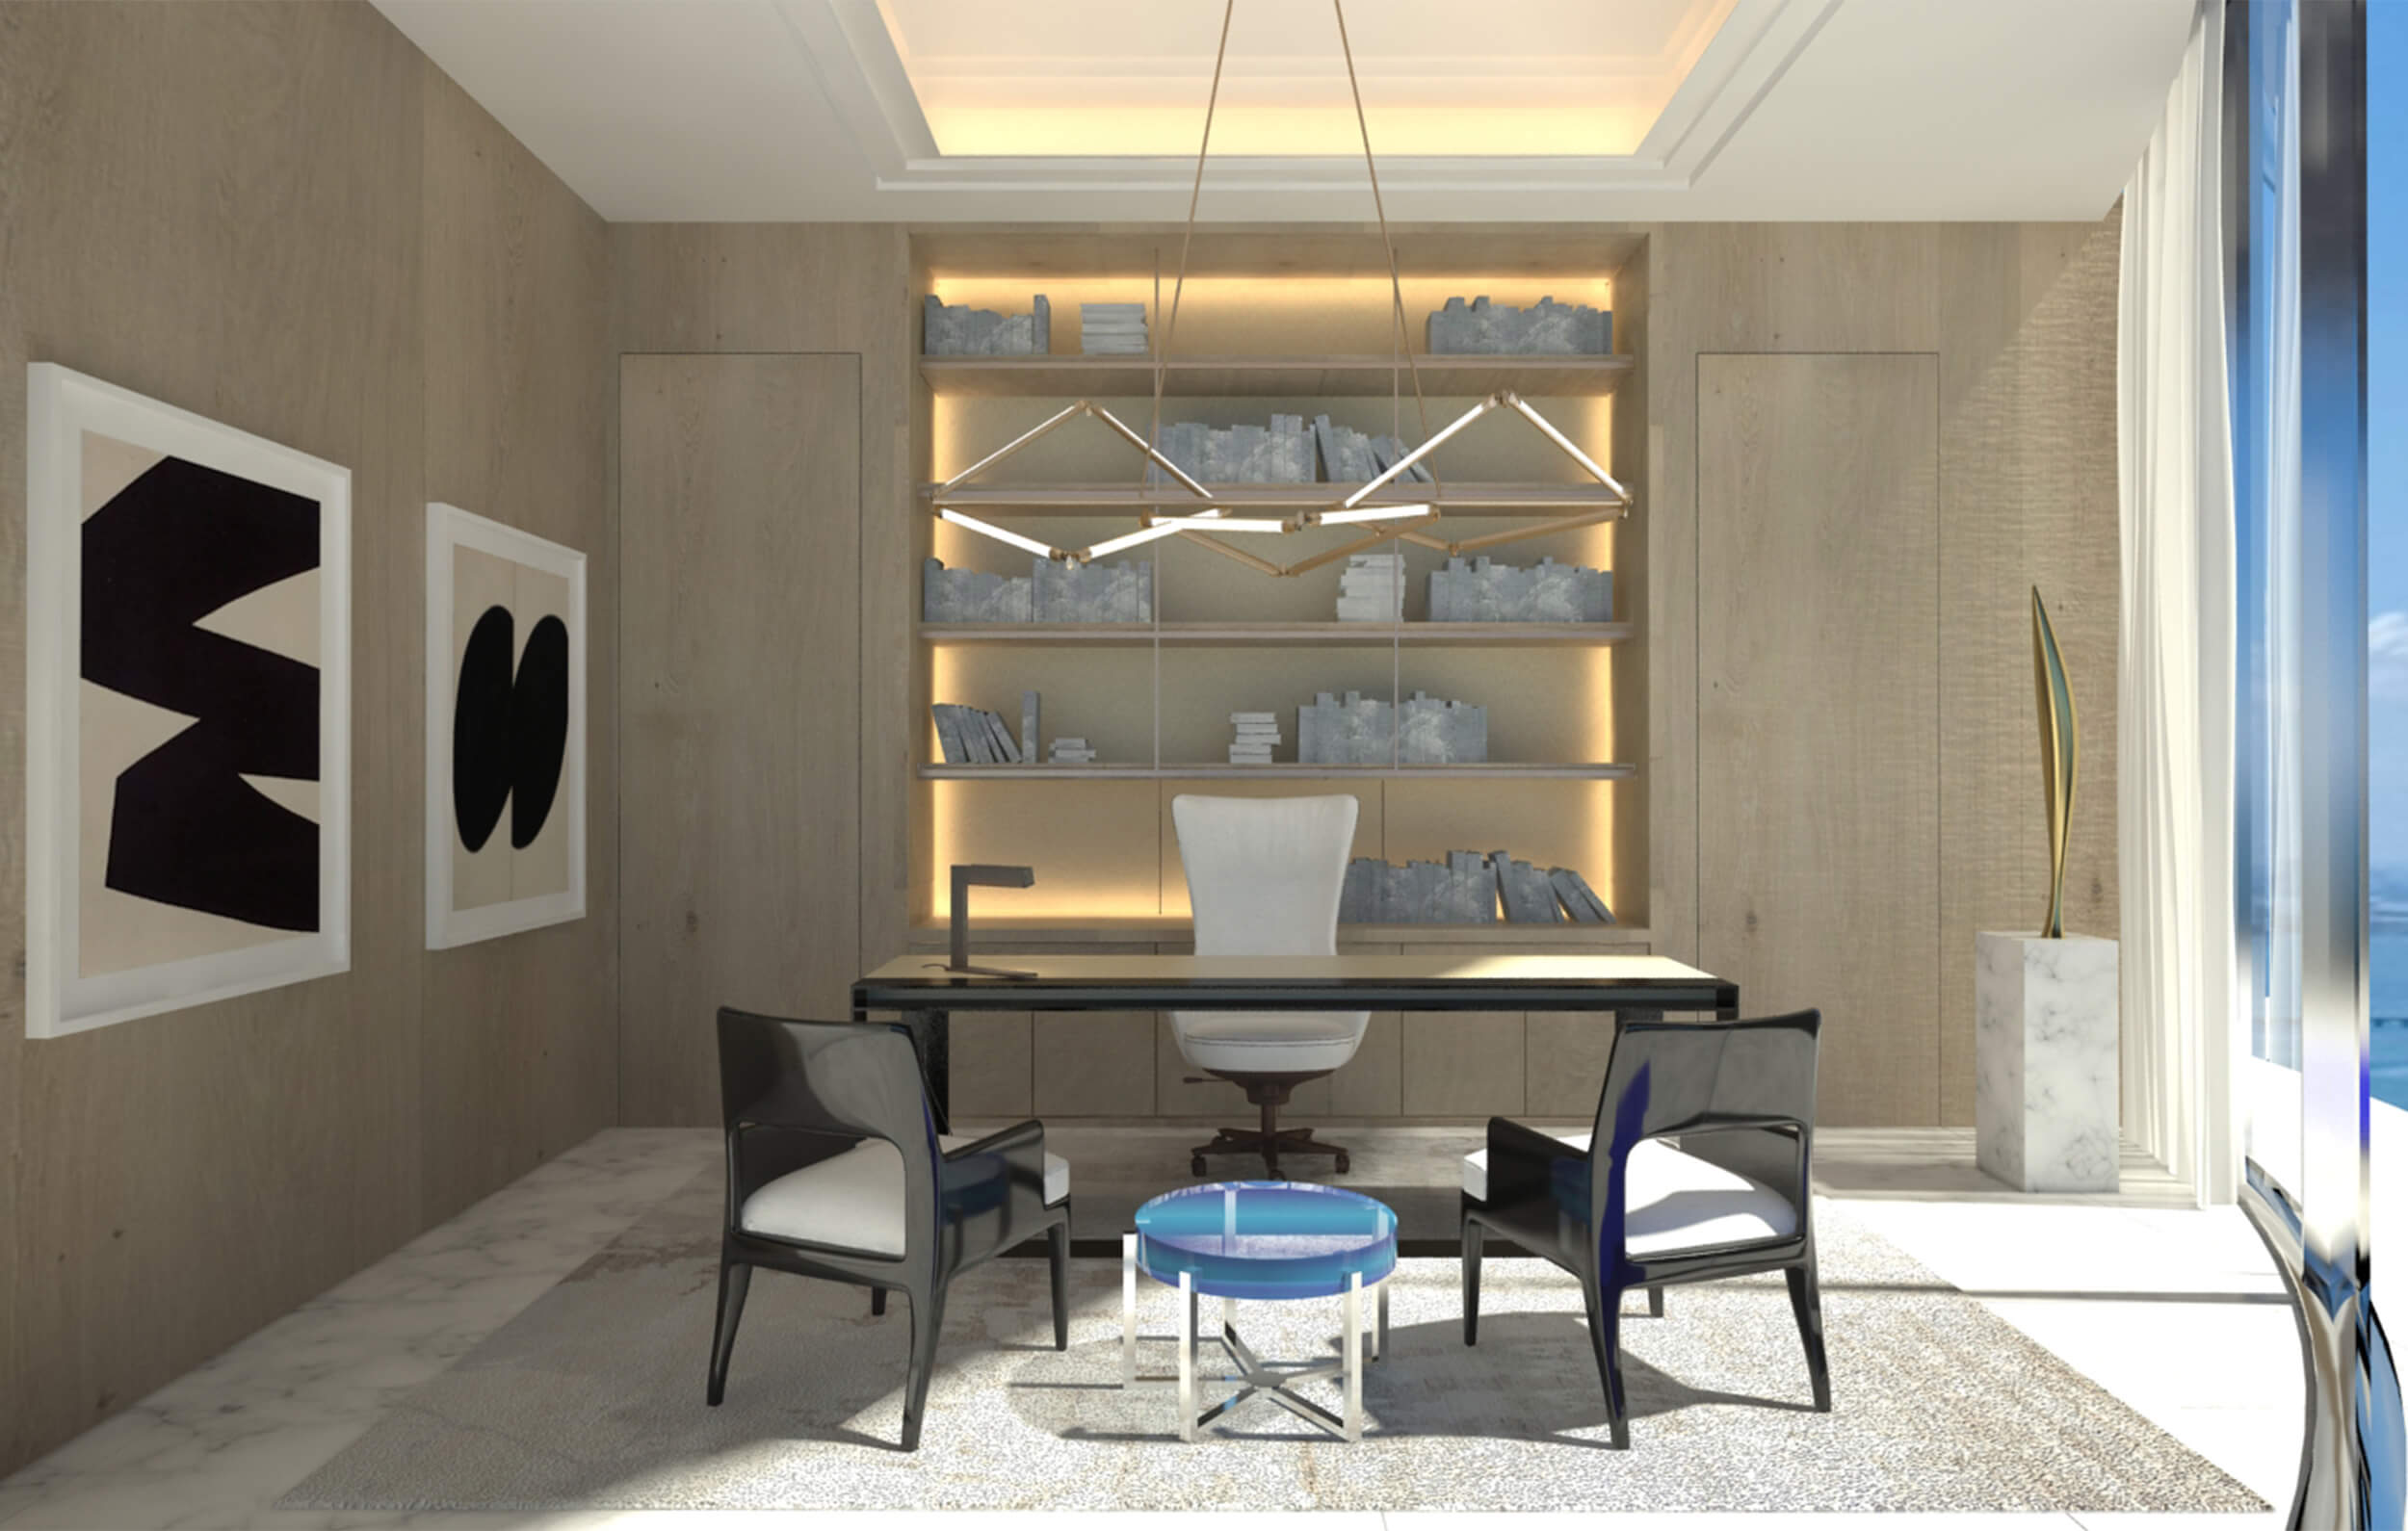 Rendering of the proposed study for our client at Ritz Carlton Residences PH in Sunny Isles Beach